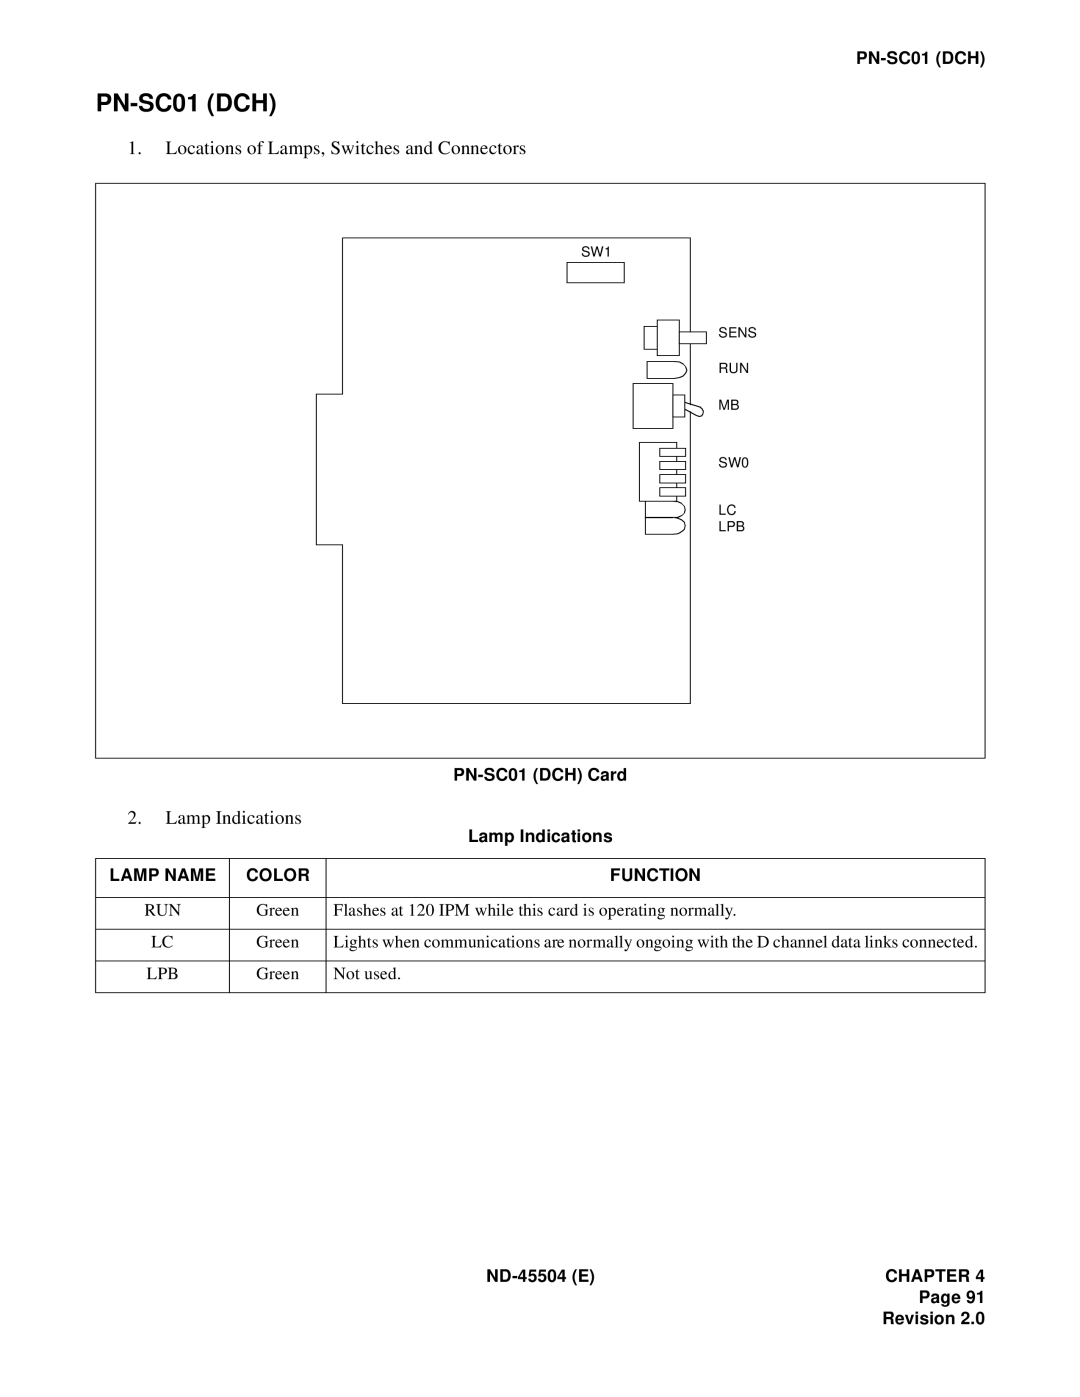 NEC 2000 IVS manual Locations of Lamps, Switches and Connectors, Lamp Indications, PN-SC01DCH Card, Lamp Name, Color 